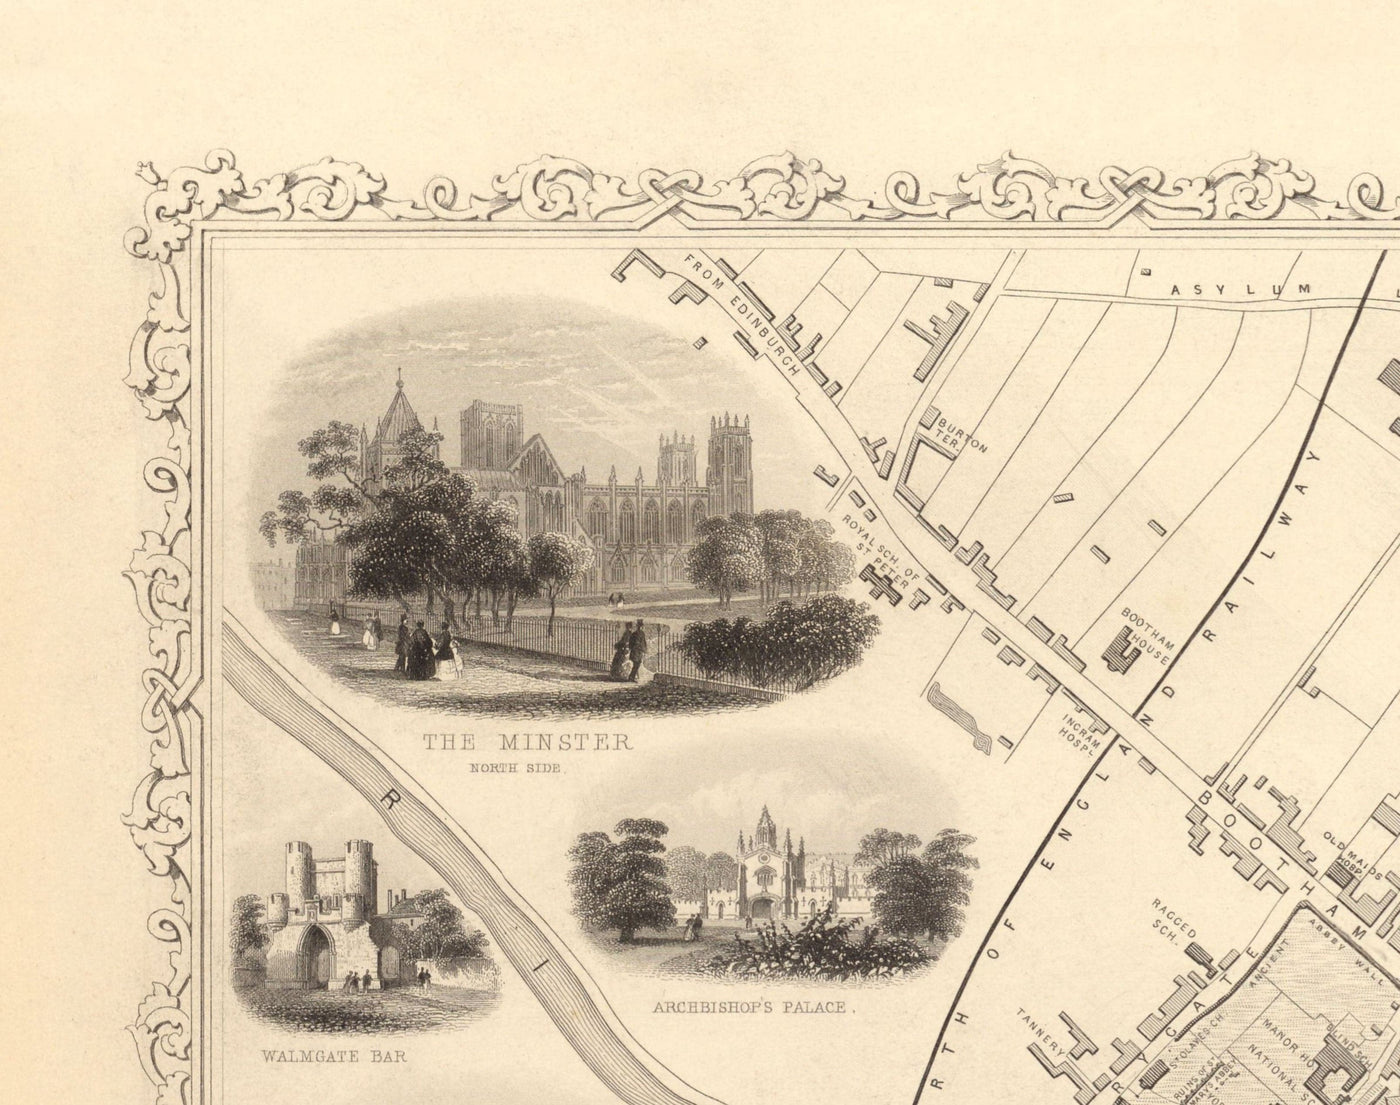 Old Map of York in 1851 by Tallis & Rapkin - City Centre Chart, York Minster Cathedral, River Ouse